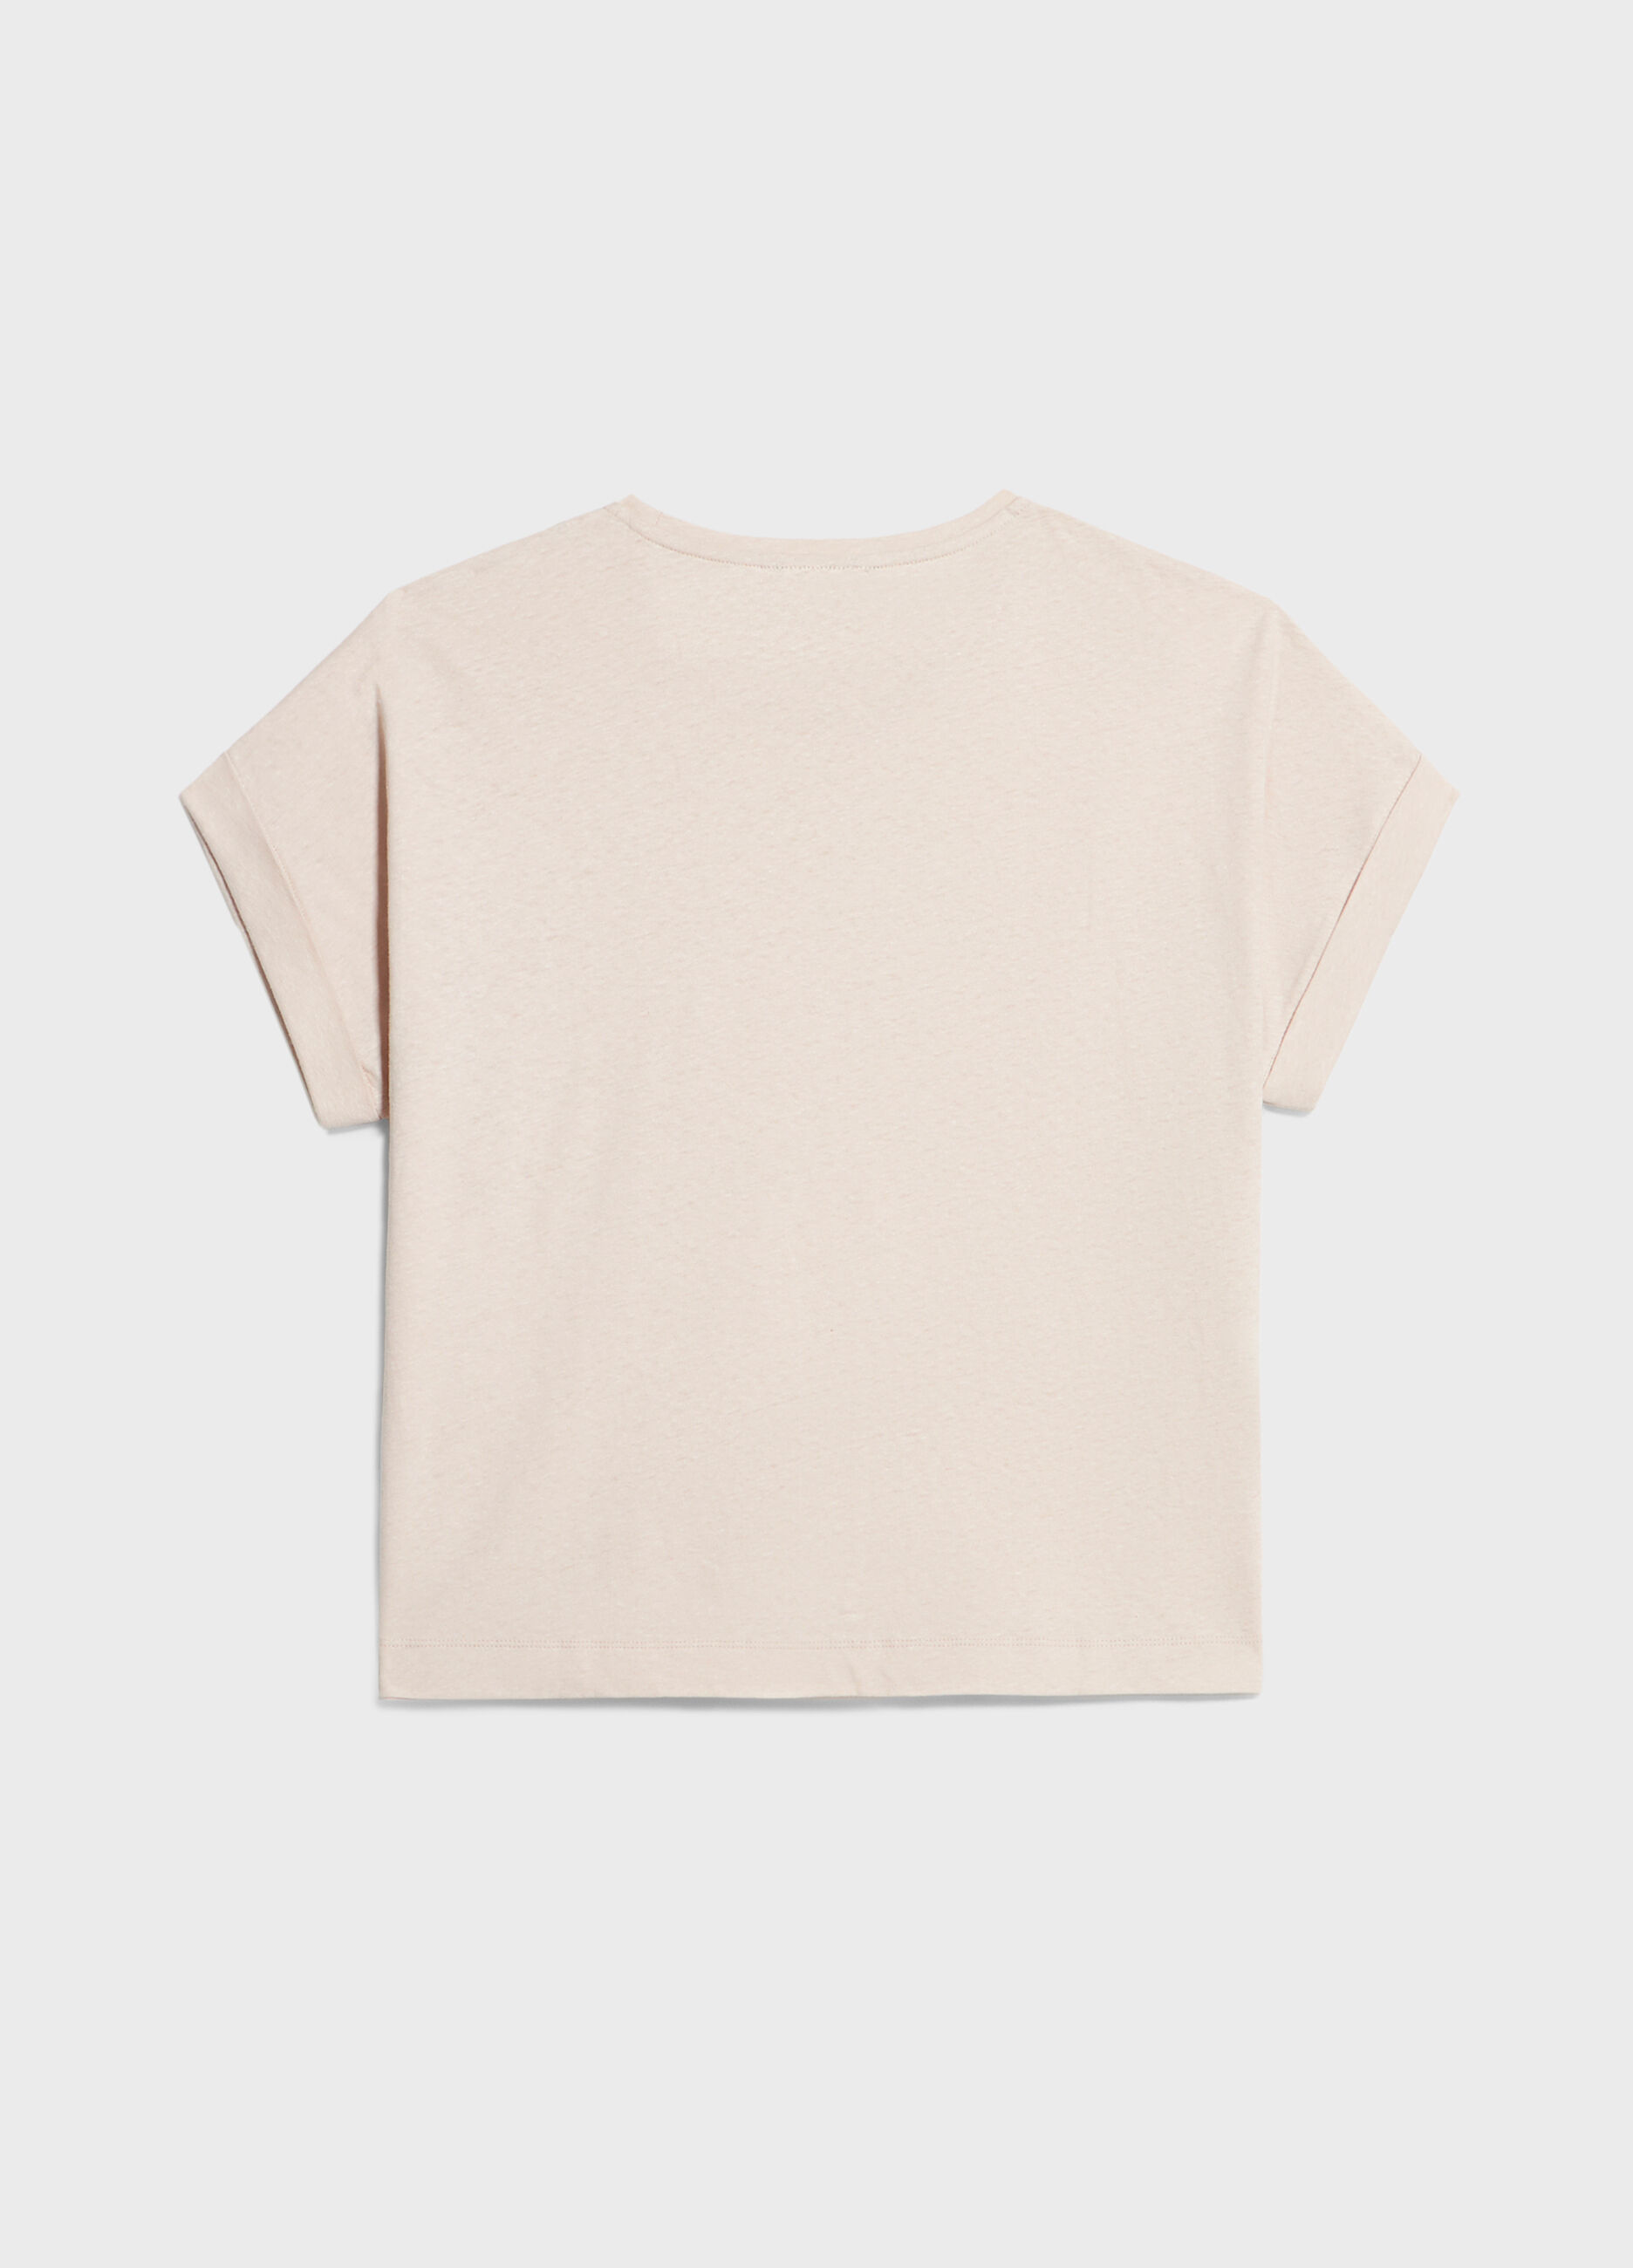 T-shirt in linen and cotton_5